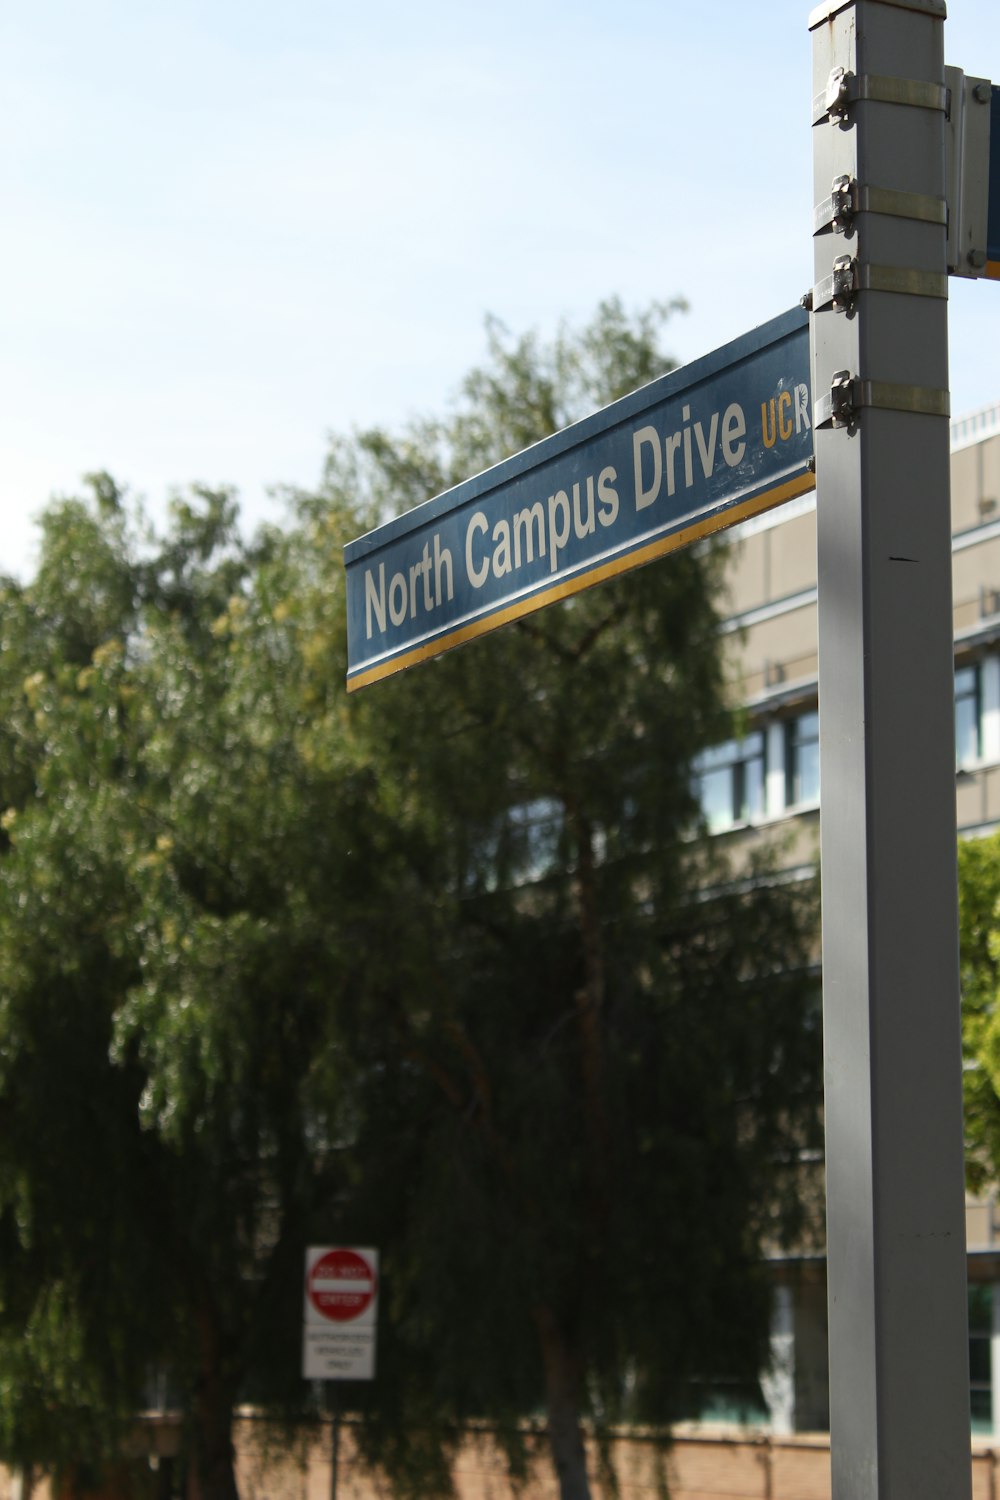 a street sign for north campus drive in front of a building